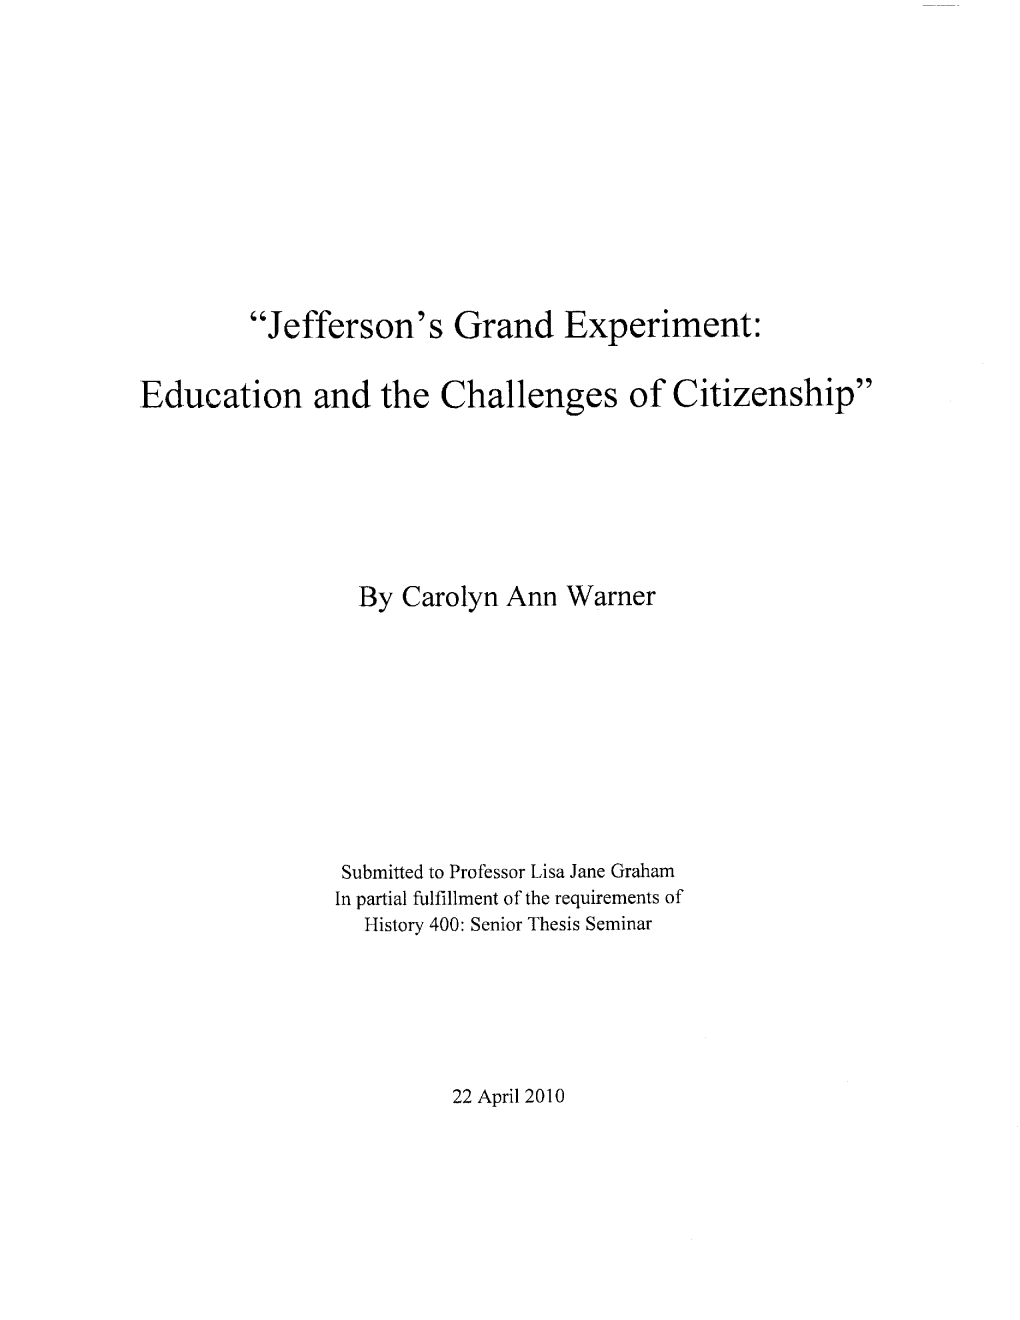 Jefferson's Grand Experiment: Education and the Challenges of Citizenship"